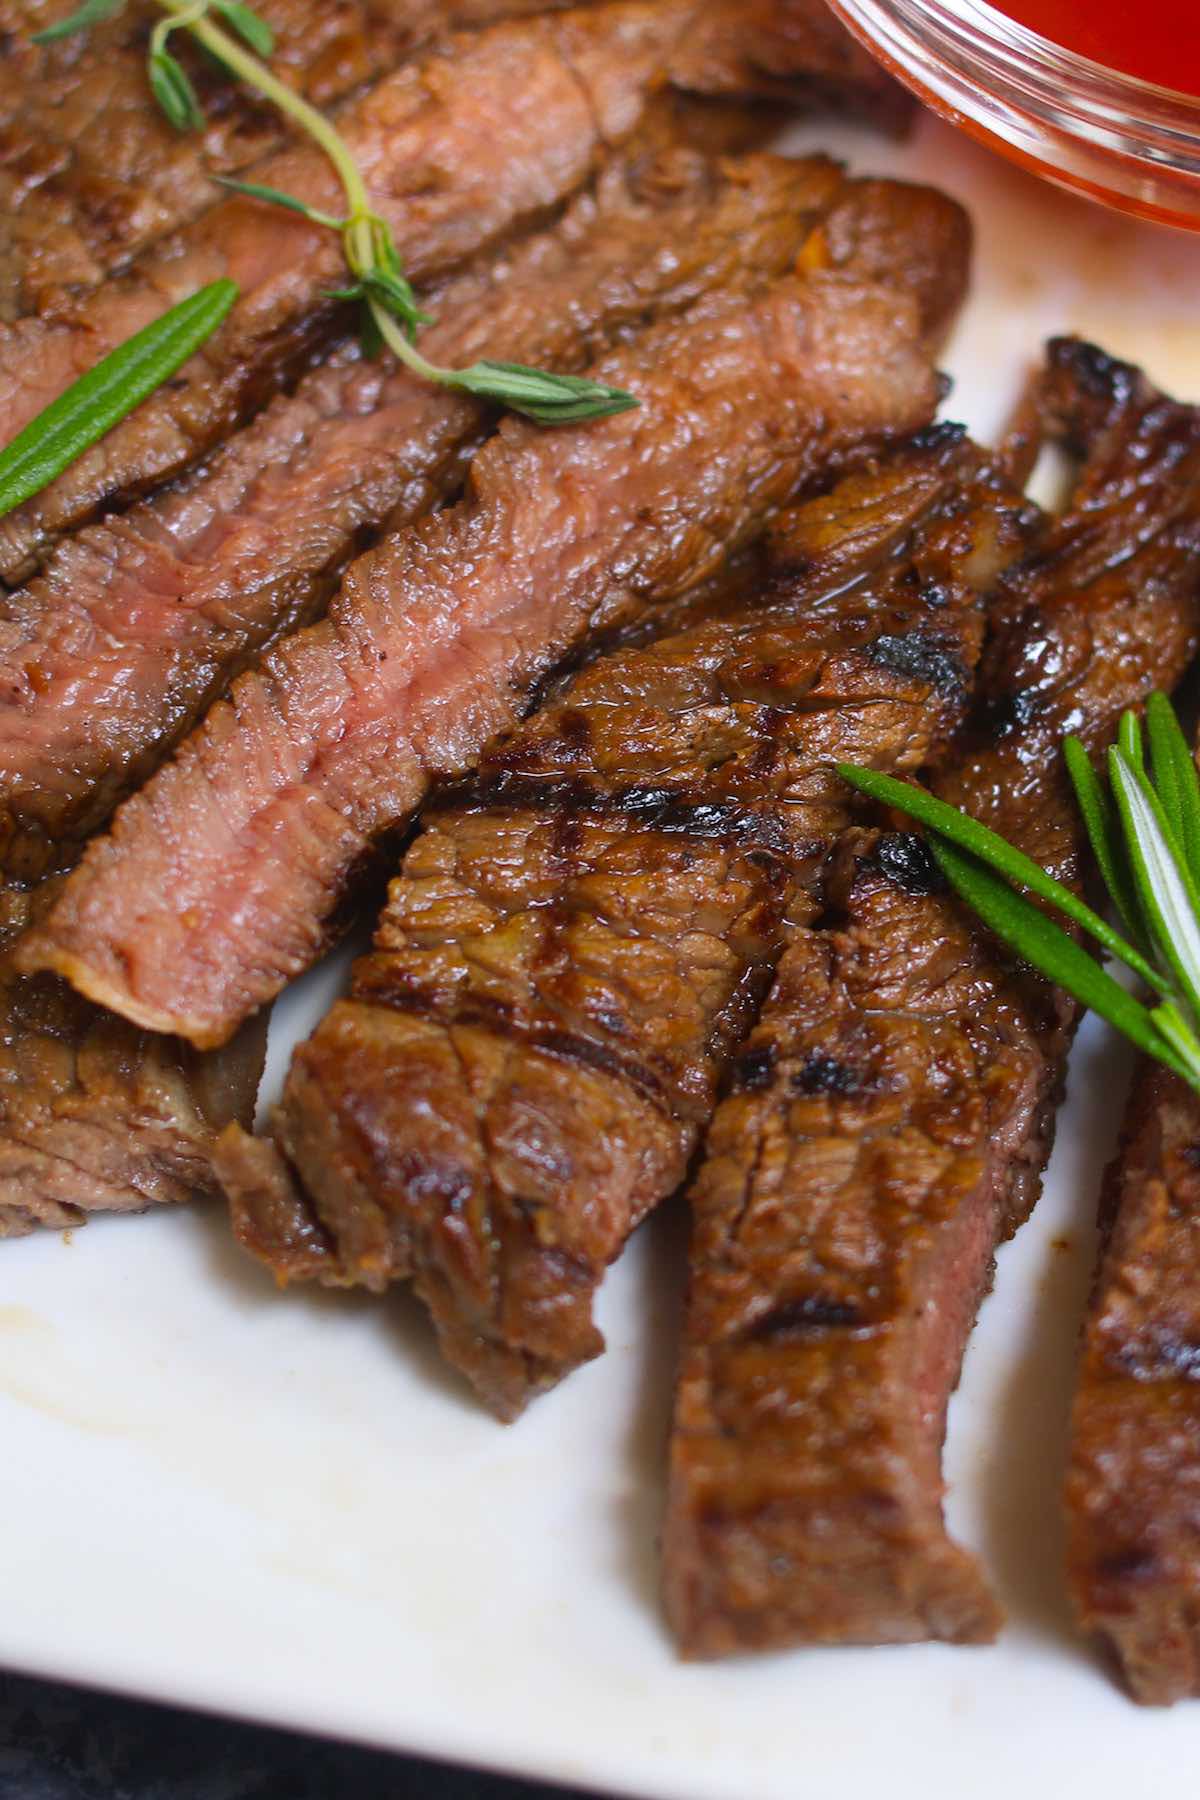 Closeup of perfectly grilled steak with crosshatch grill marks and a tender and juicy interior